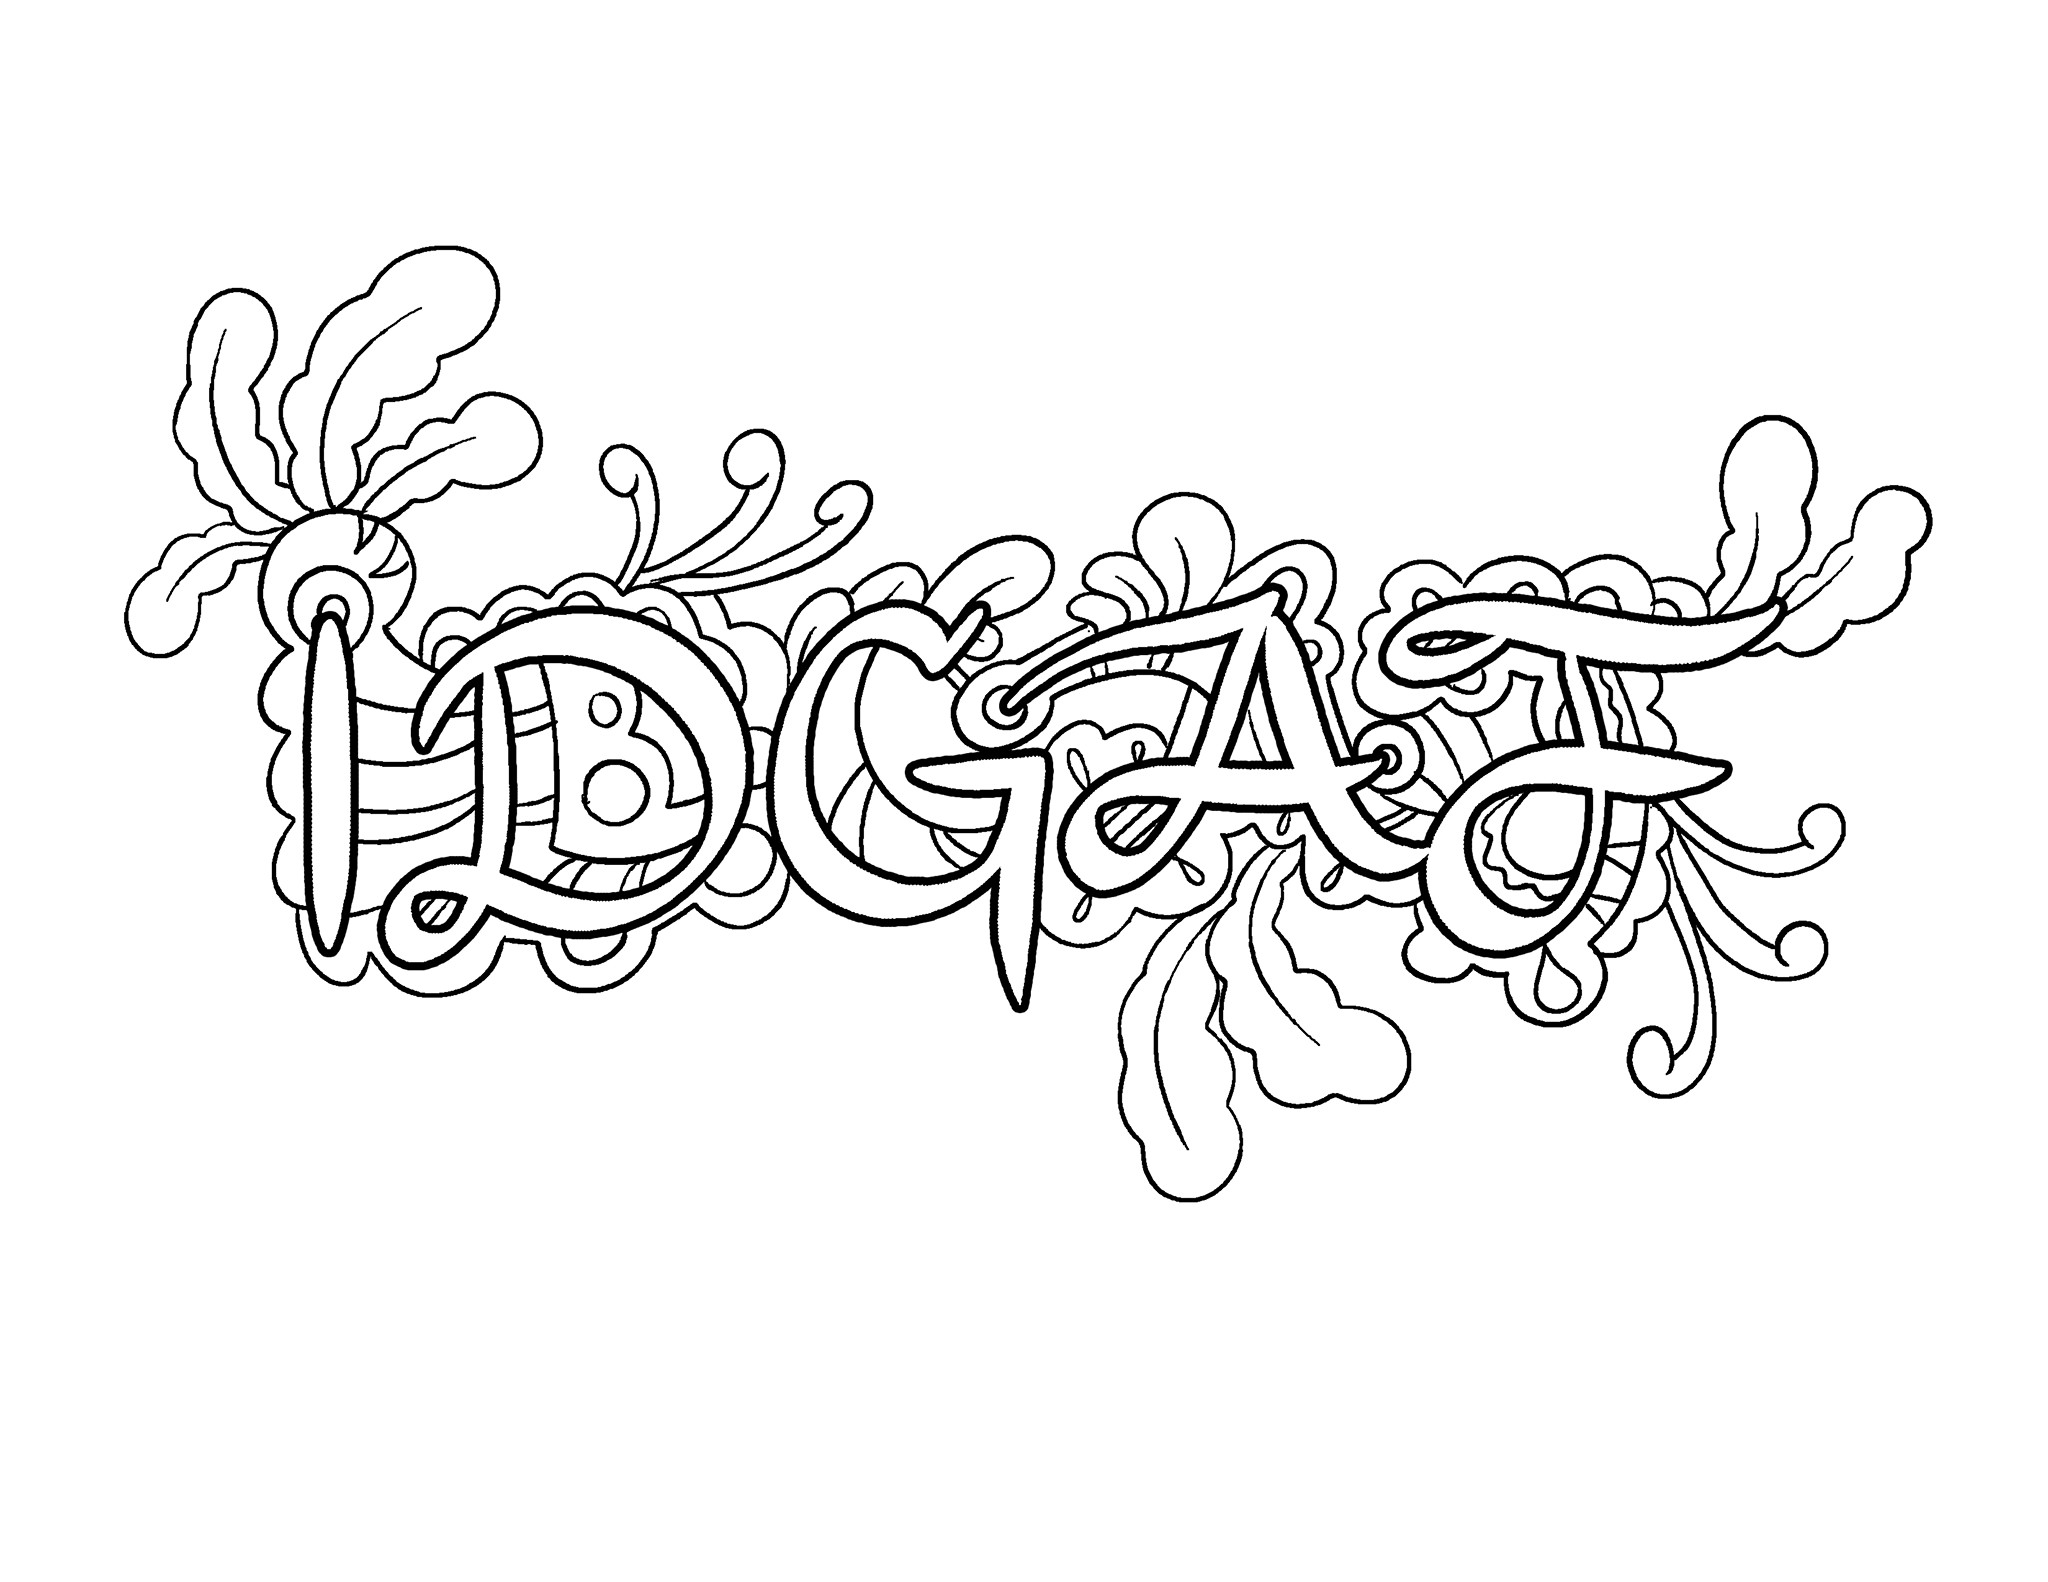 Swear Word Coloring Pages - Best Coloring Pages For Kids